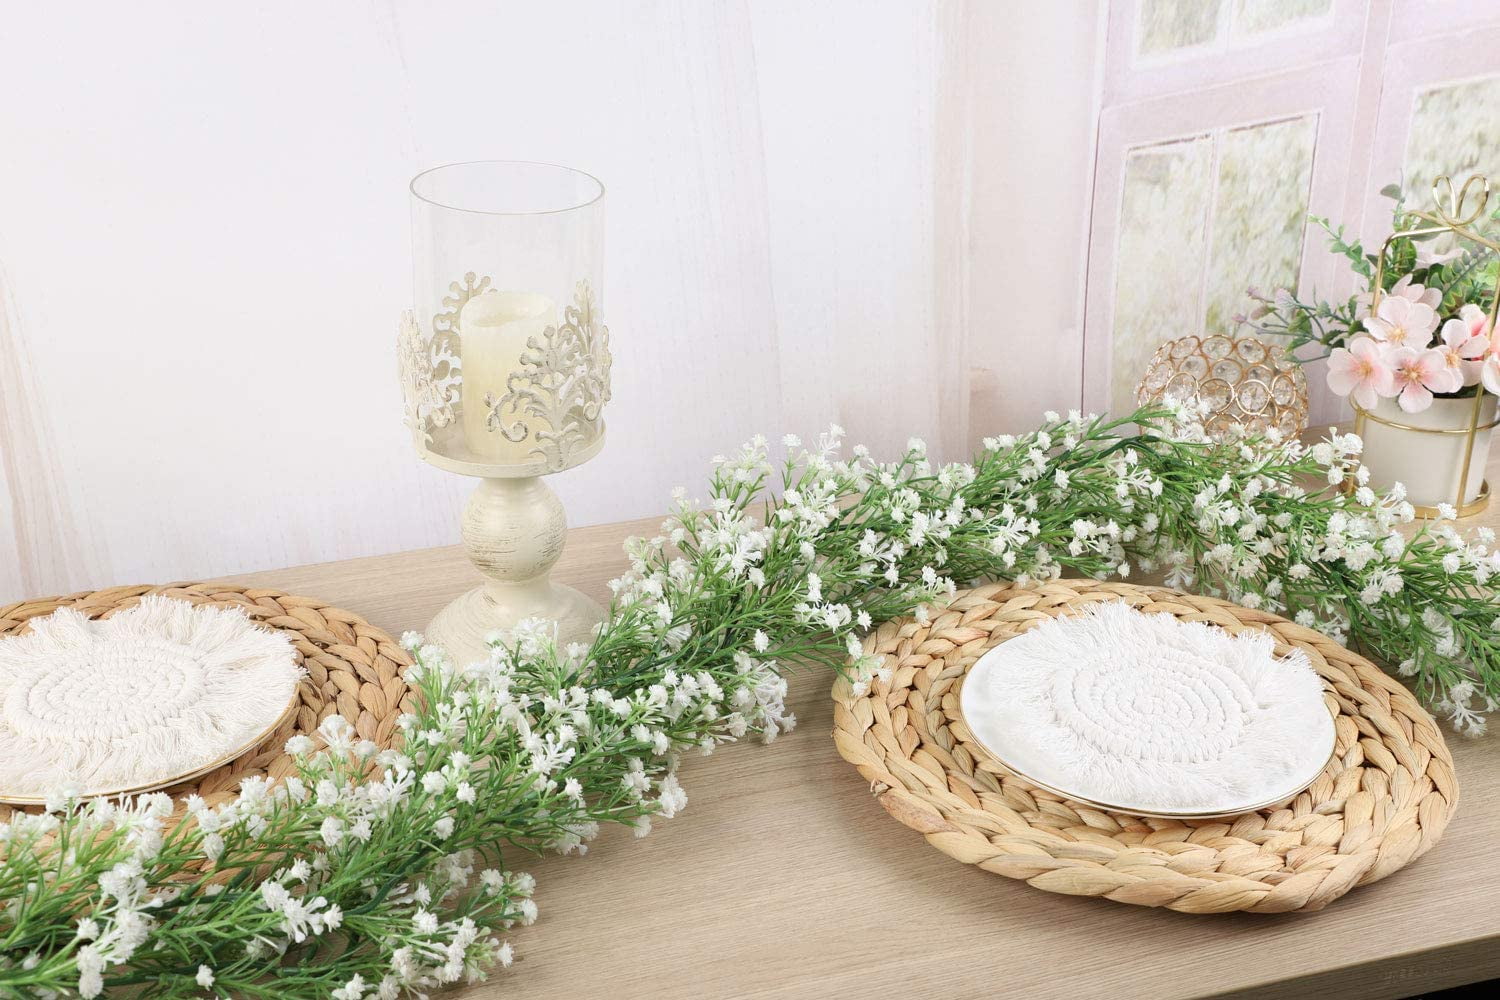  TABLECLOTHSFACTORY 6ft White Artificial Silk Gypsophila Table  Flower Garland, Faux Baby Breath Hanging Flower Vines : Home & Kitchen